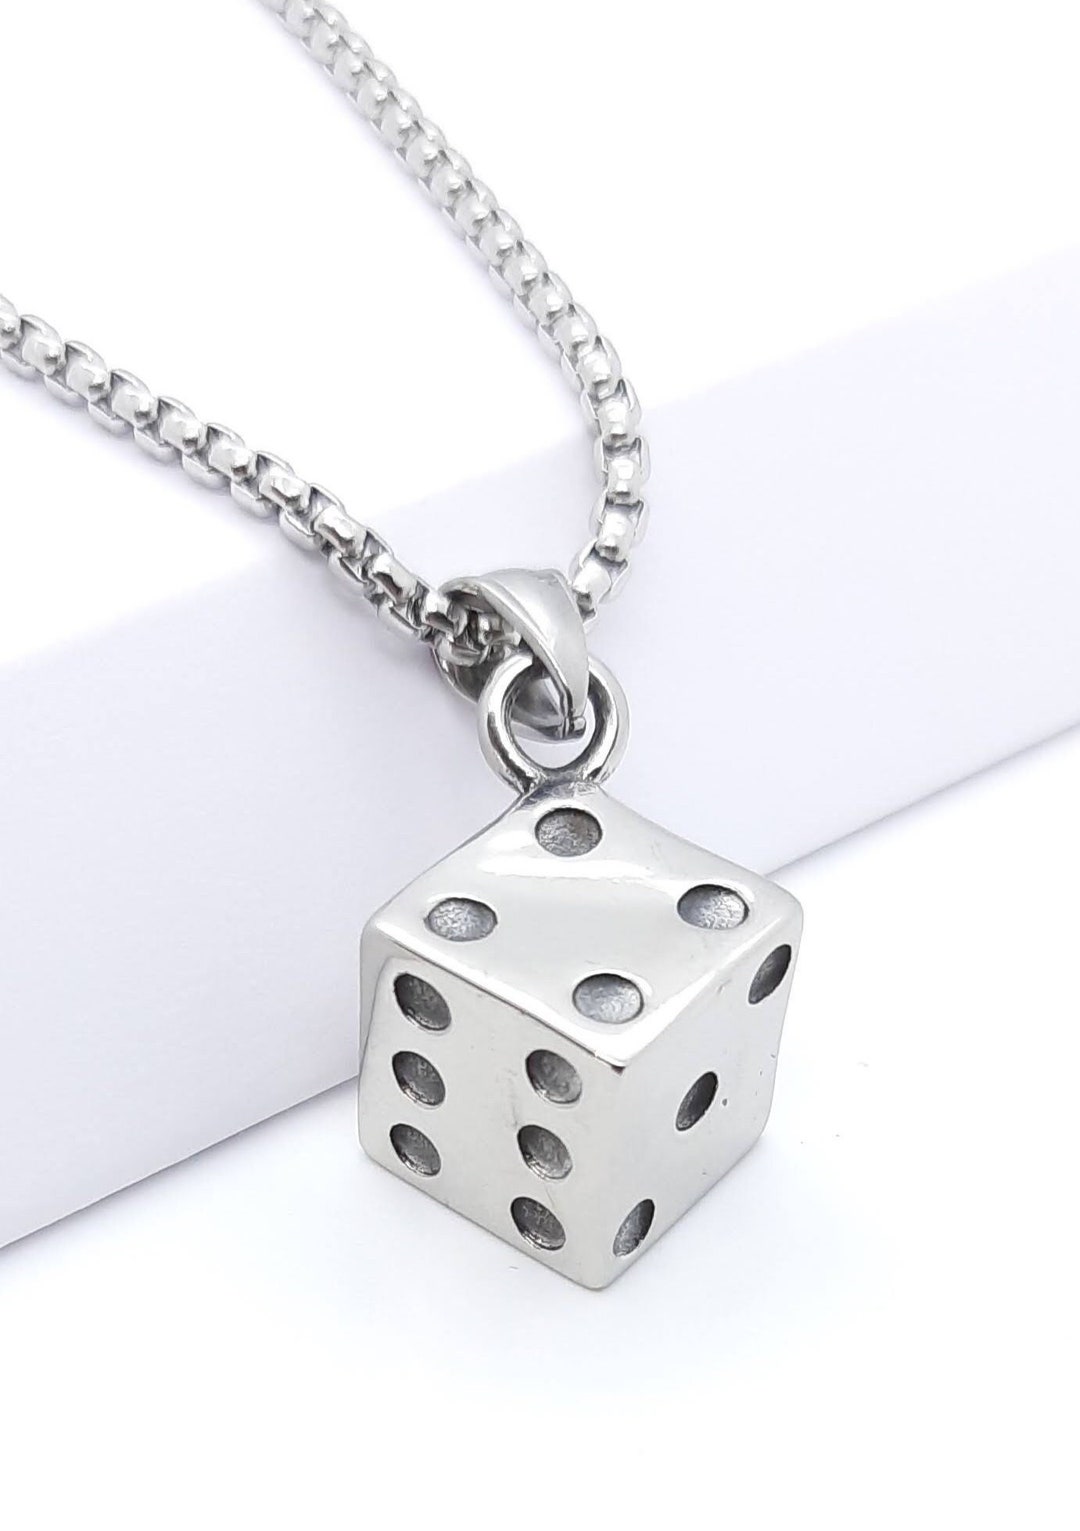 Pair 2 Lucky Dice Charm with Charm Bracelet, Necklace, Keychain, Jewelry  Gifts Men Women